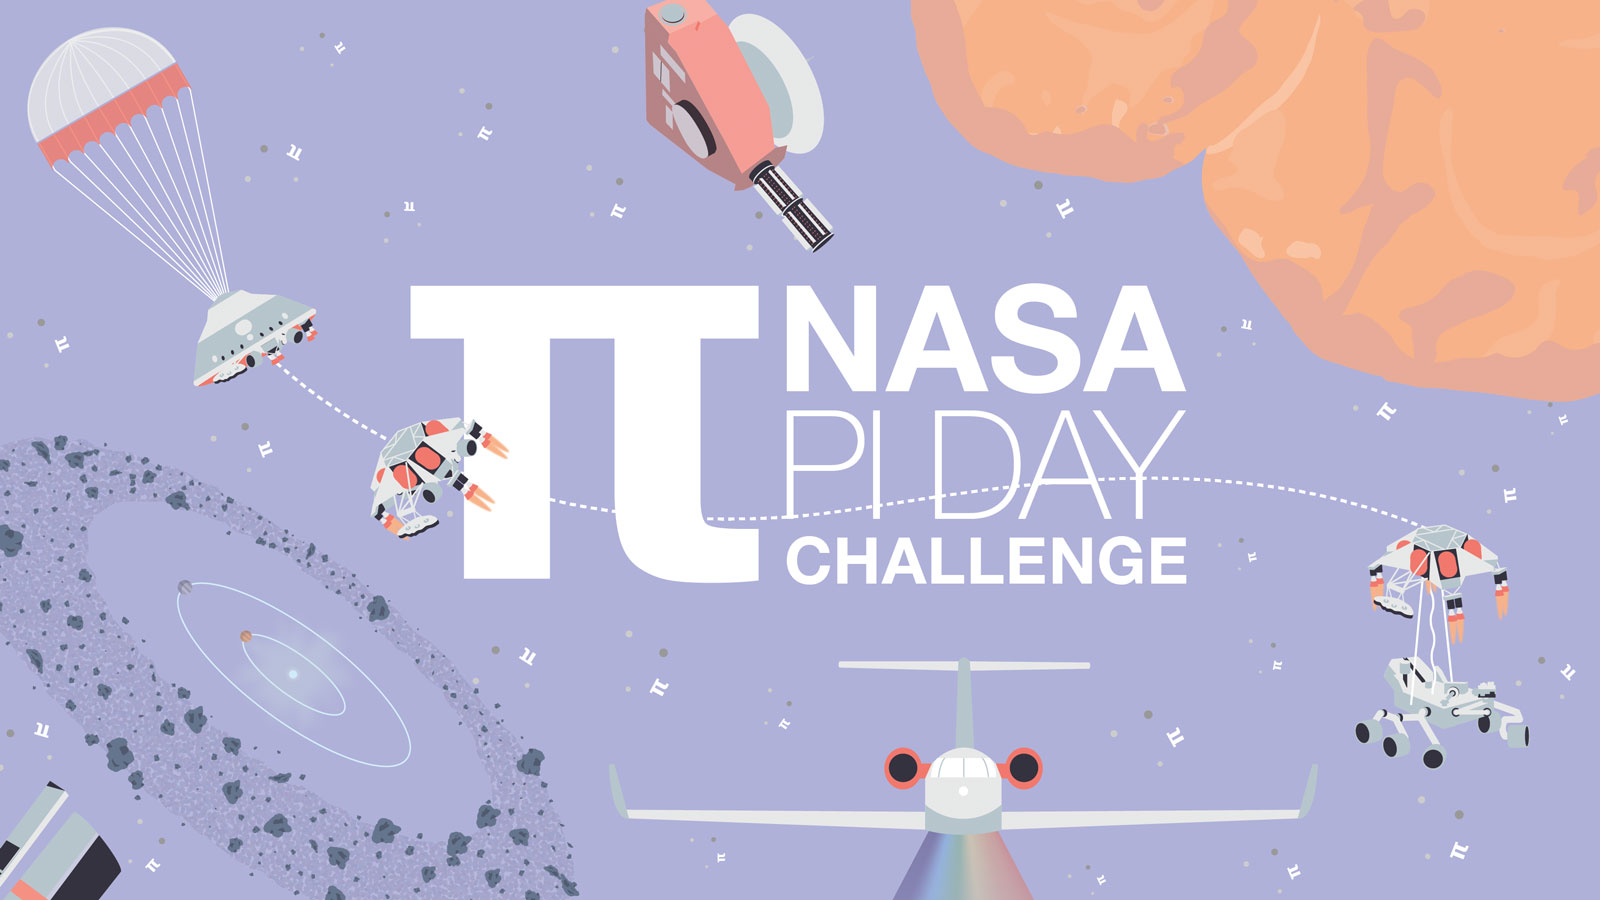 Whimsical space graphic says NASA Pi Day Challenge